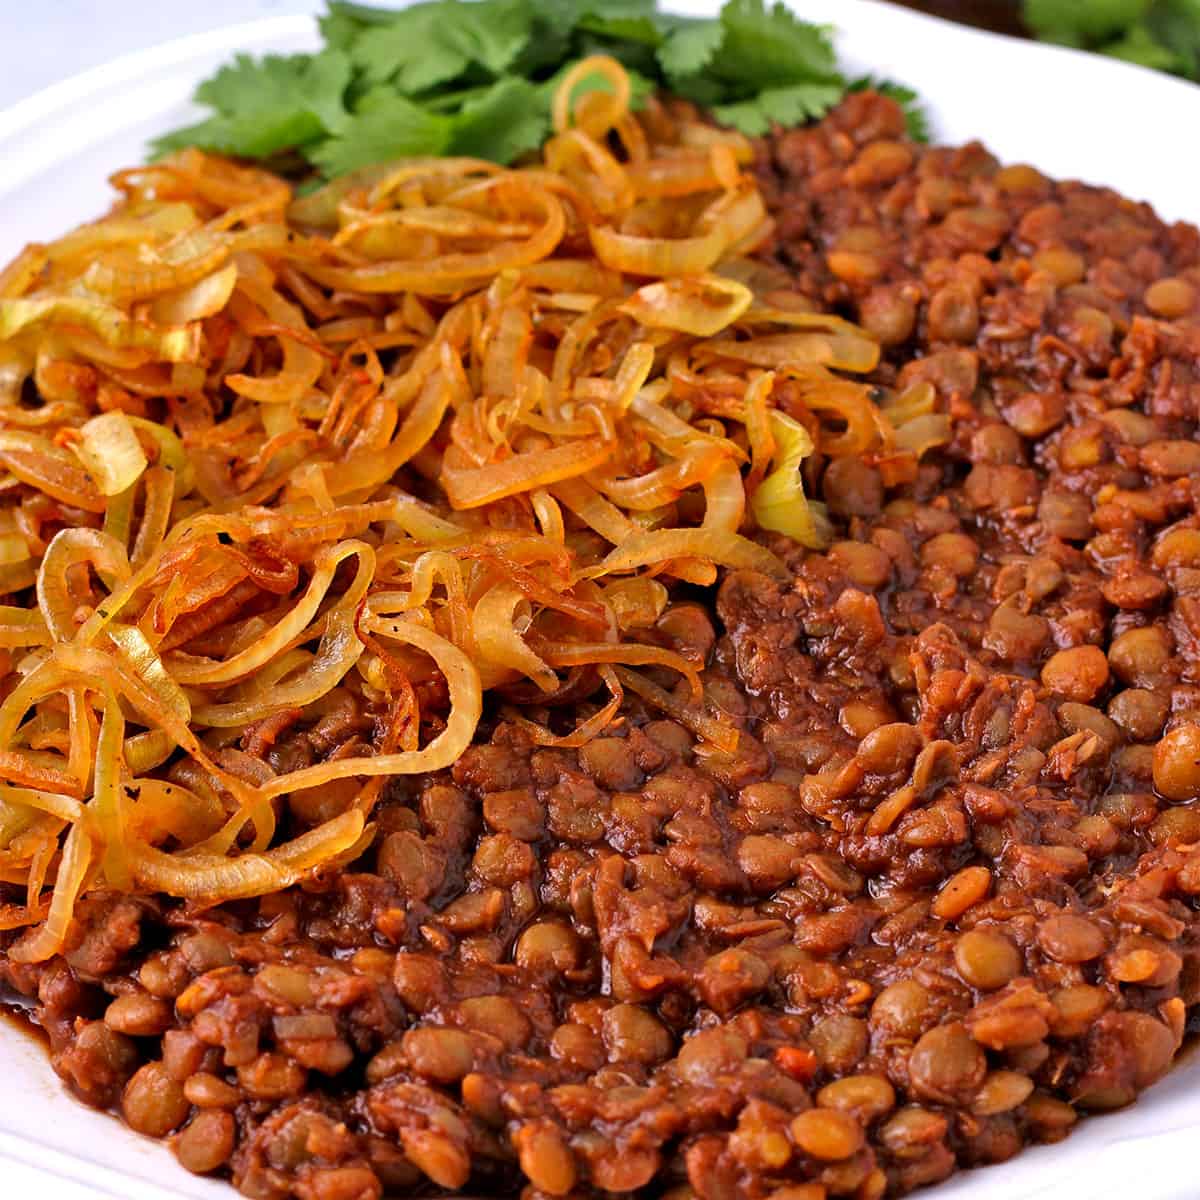 Lentils in tamarind sauce with caramelized onions.